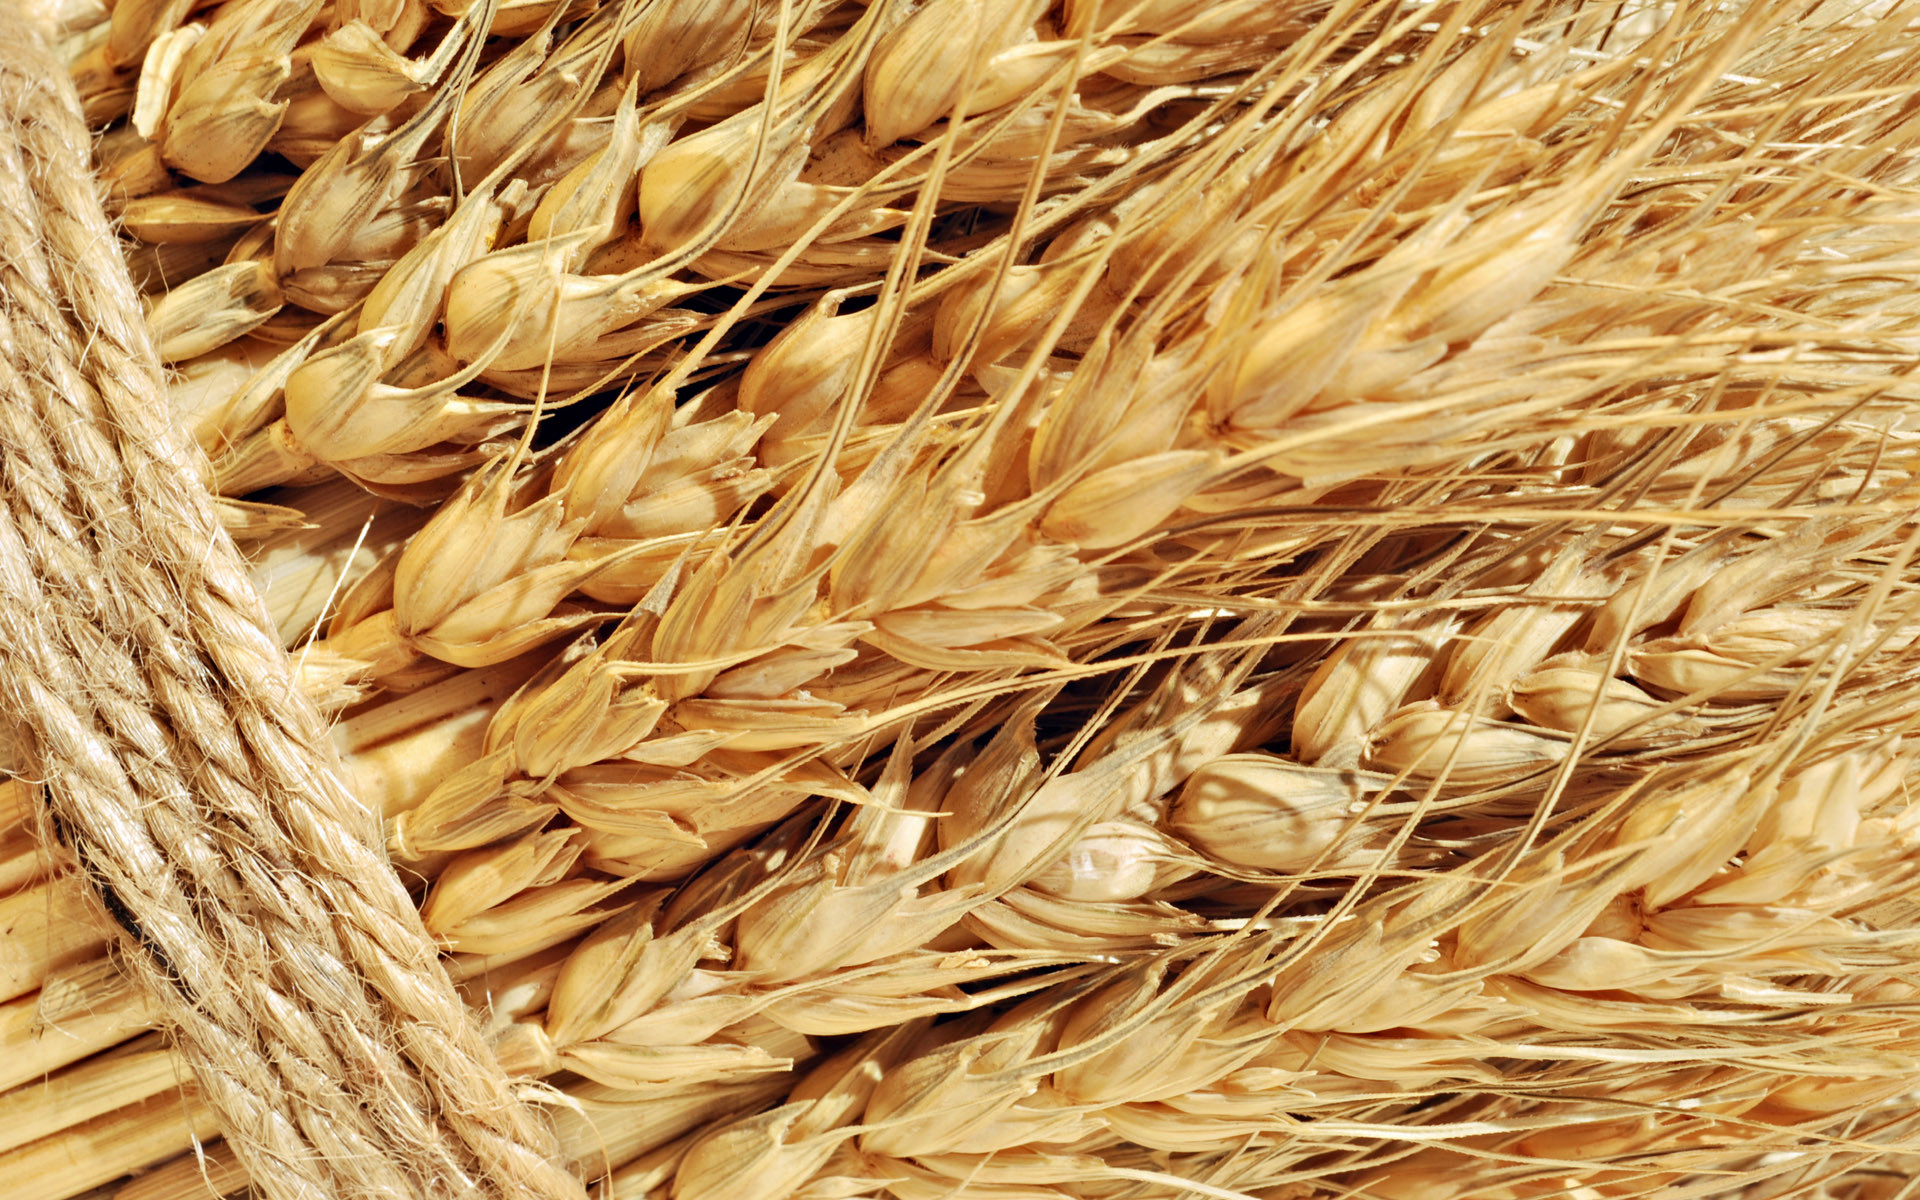 Data on the state of the crops raised the price of wheat